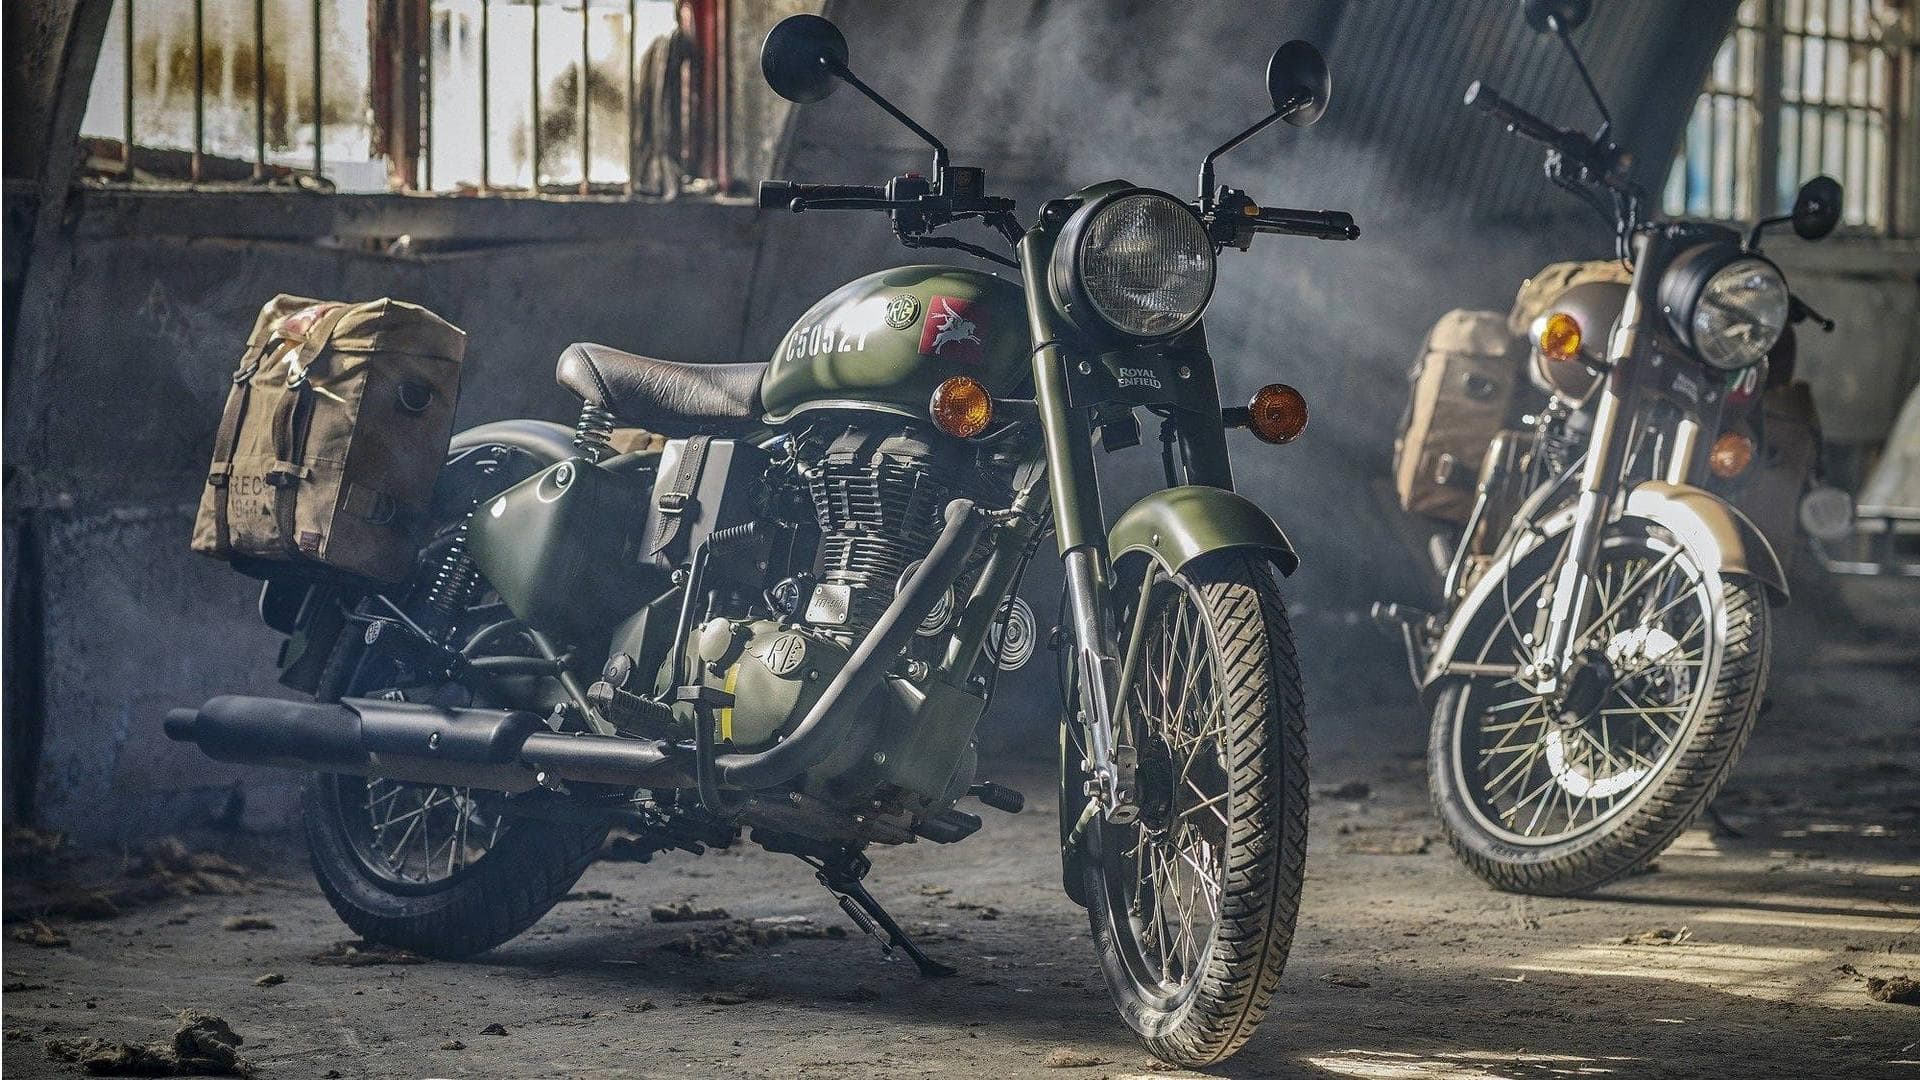 Why Classic 350 became the most sought-after Royal Enfield motorcycle